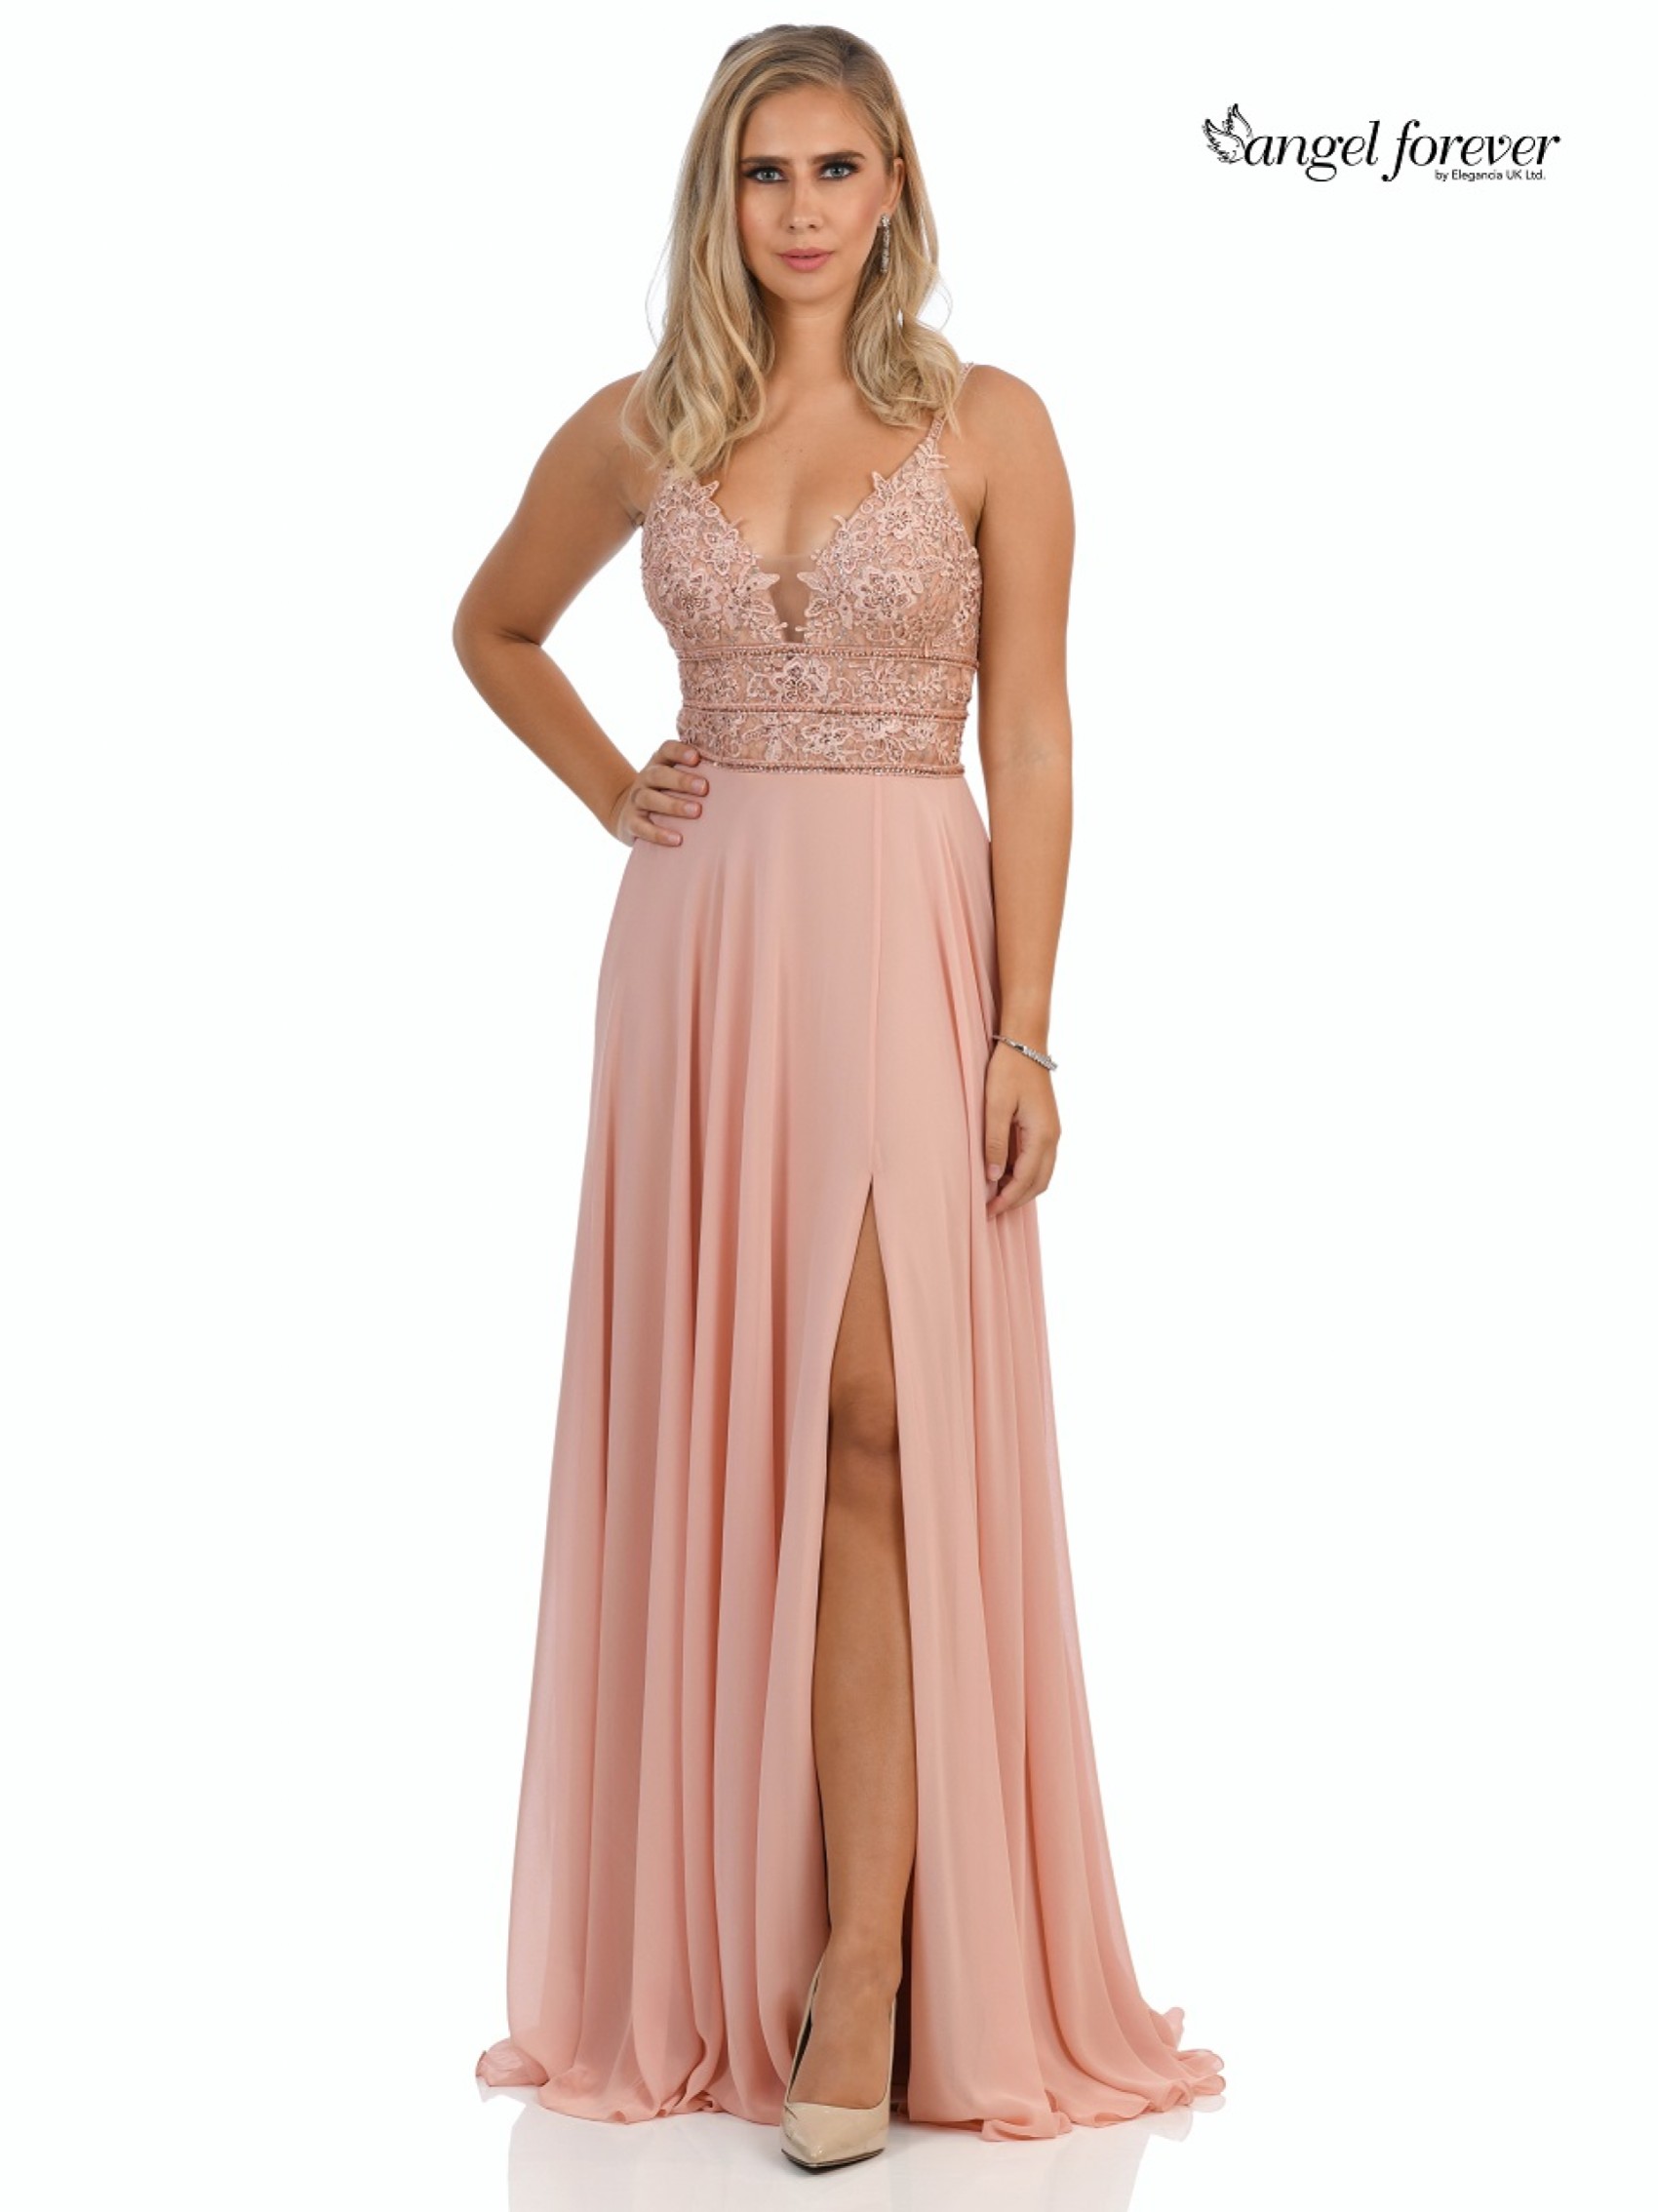 Angel Forever Beaded Lace A Line Chiffon Prom Dress (Rose Pink)